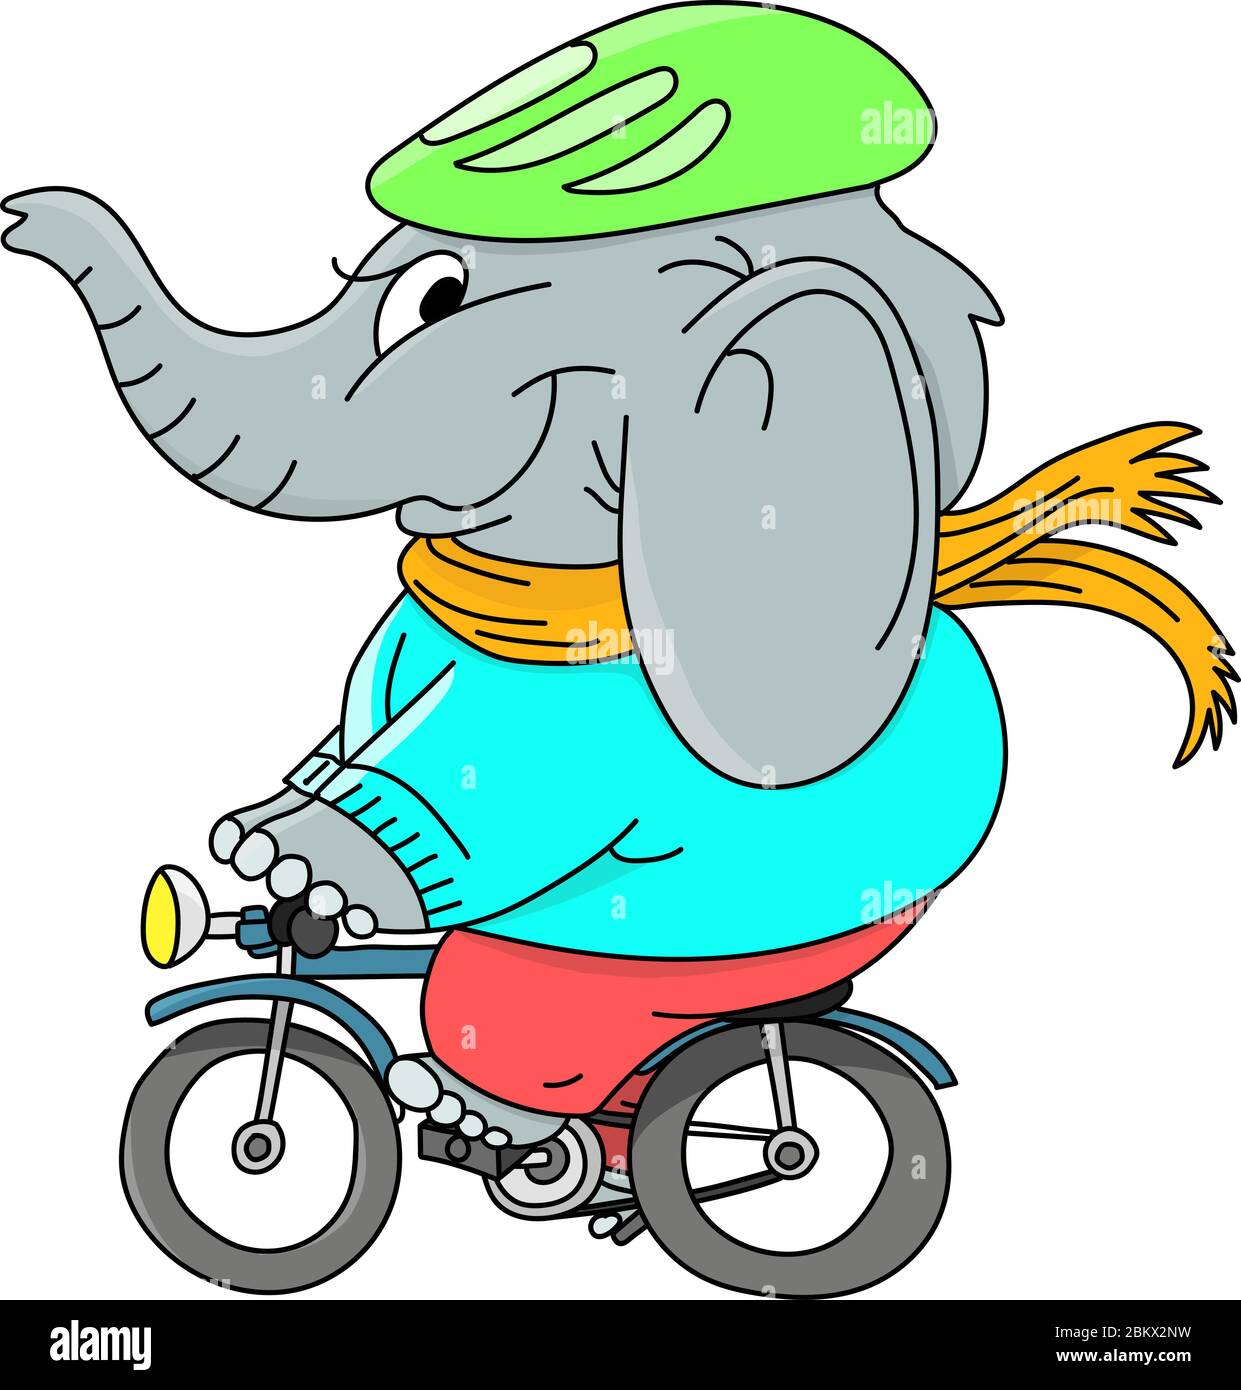 Cartoon elephant wearing a hat and a scarf riding a bicycle vector illustration Stock Vector